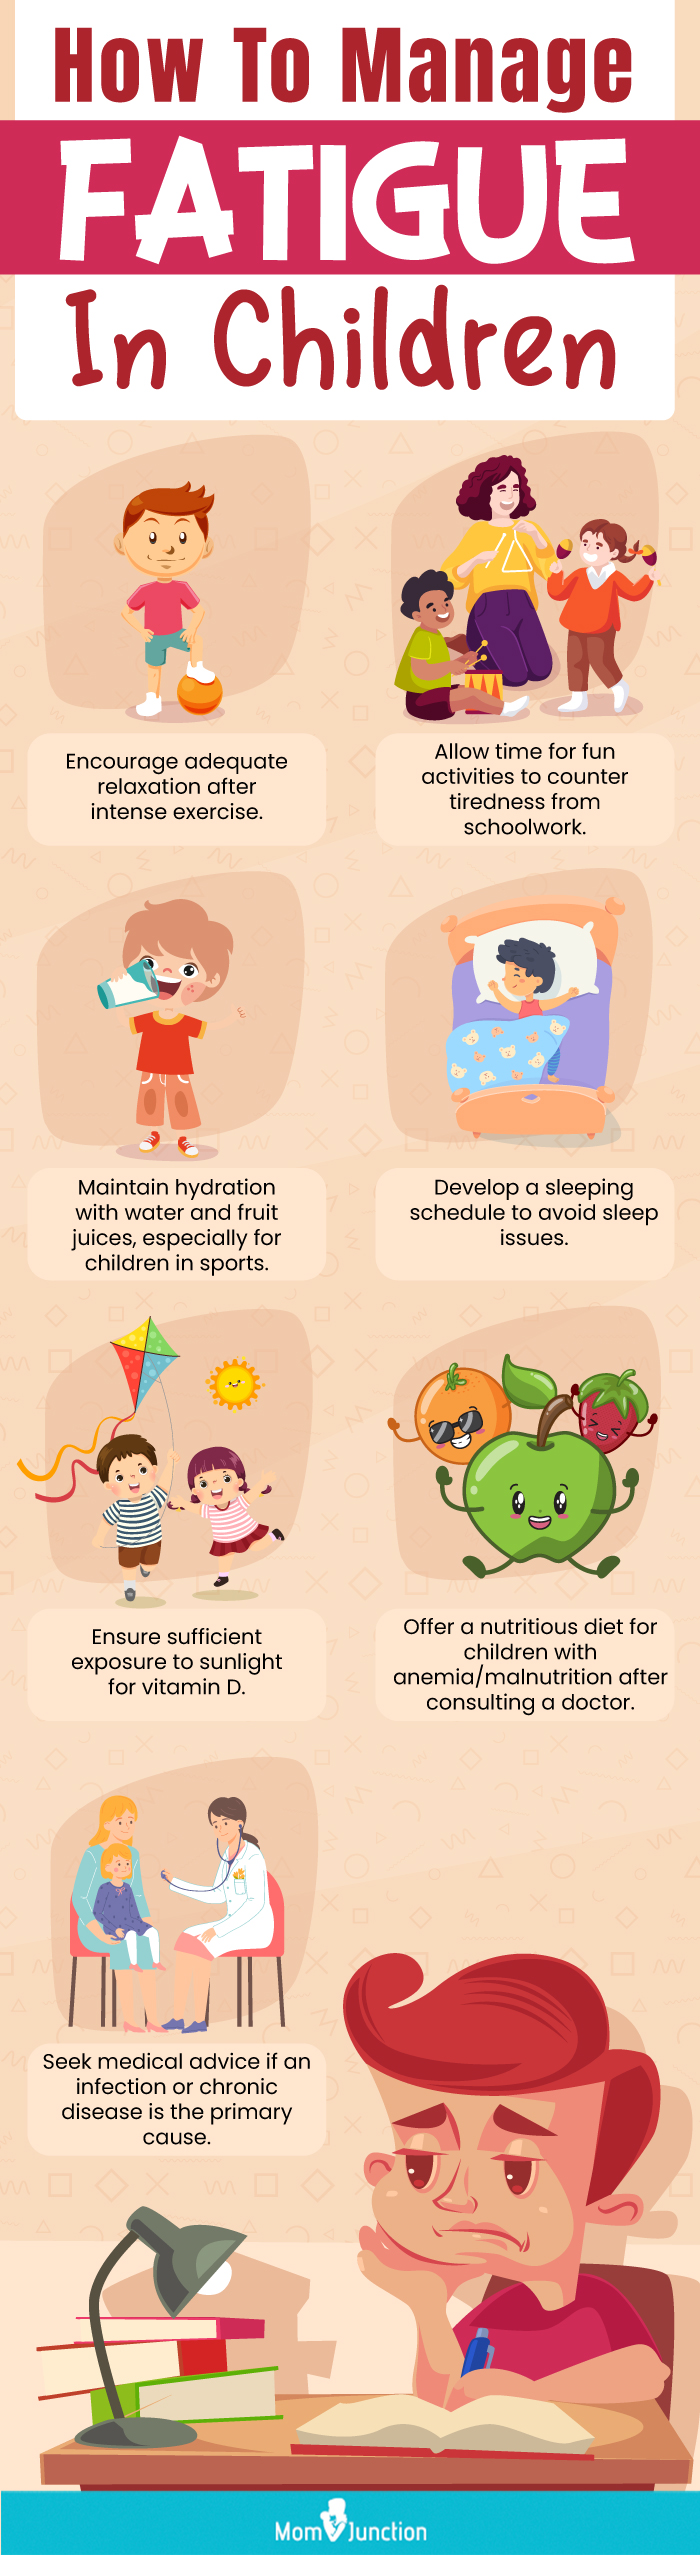 how to manage fatigue in children (infographic)